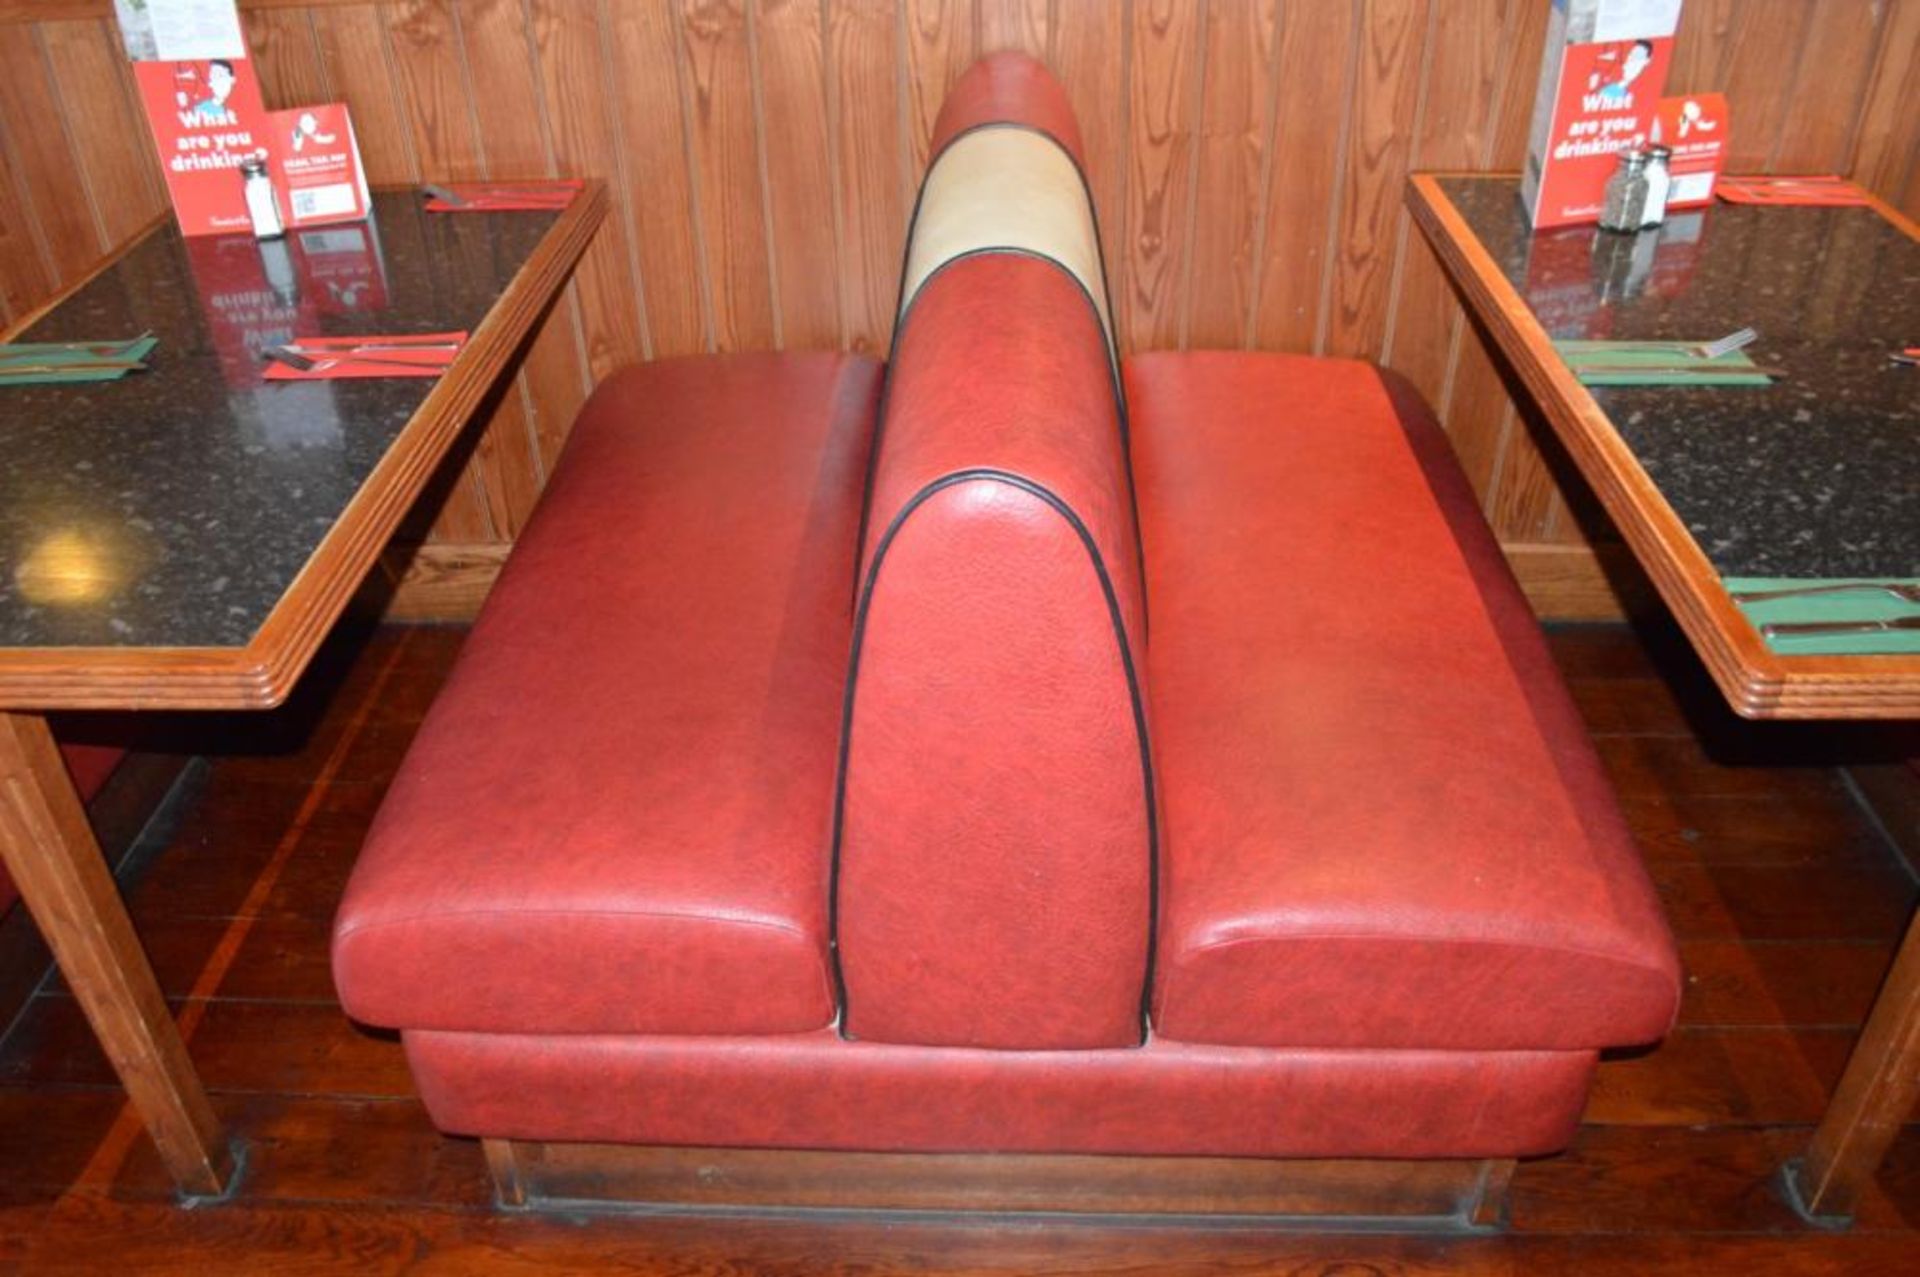 1 x Selection of Cosy Bespoke Seating Booths in a 1950's Retro American Diner Design With Dining Tab - Image 23 of 30